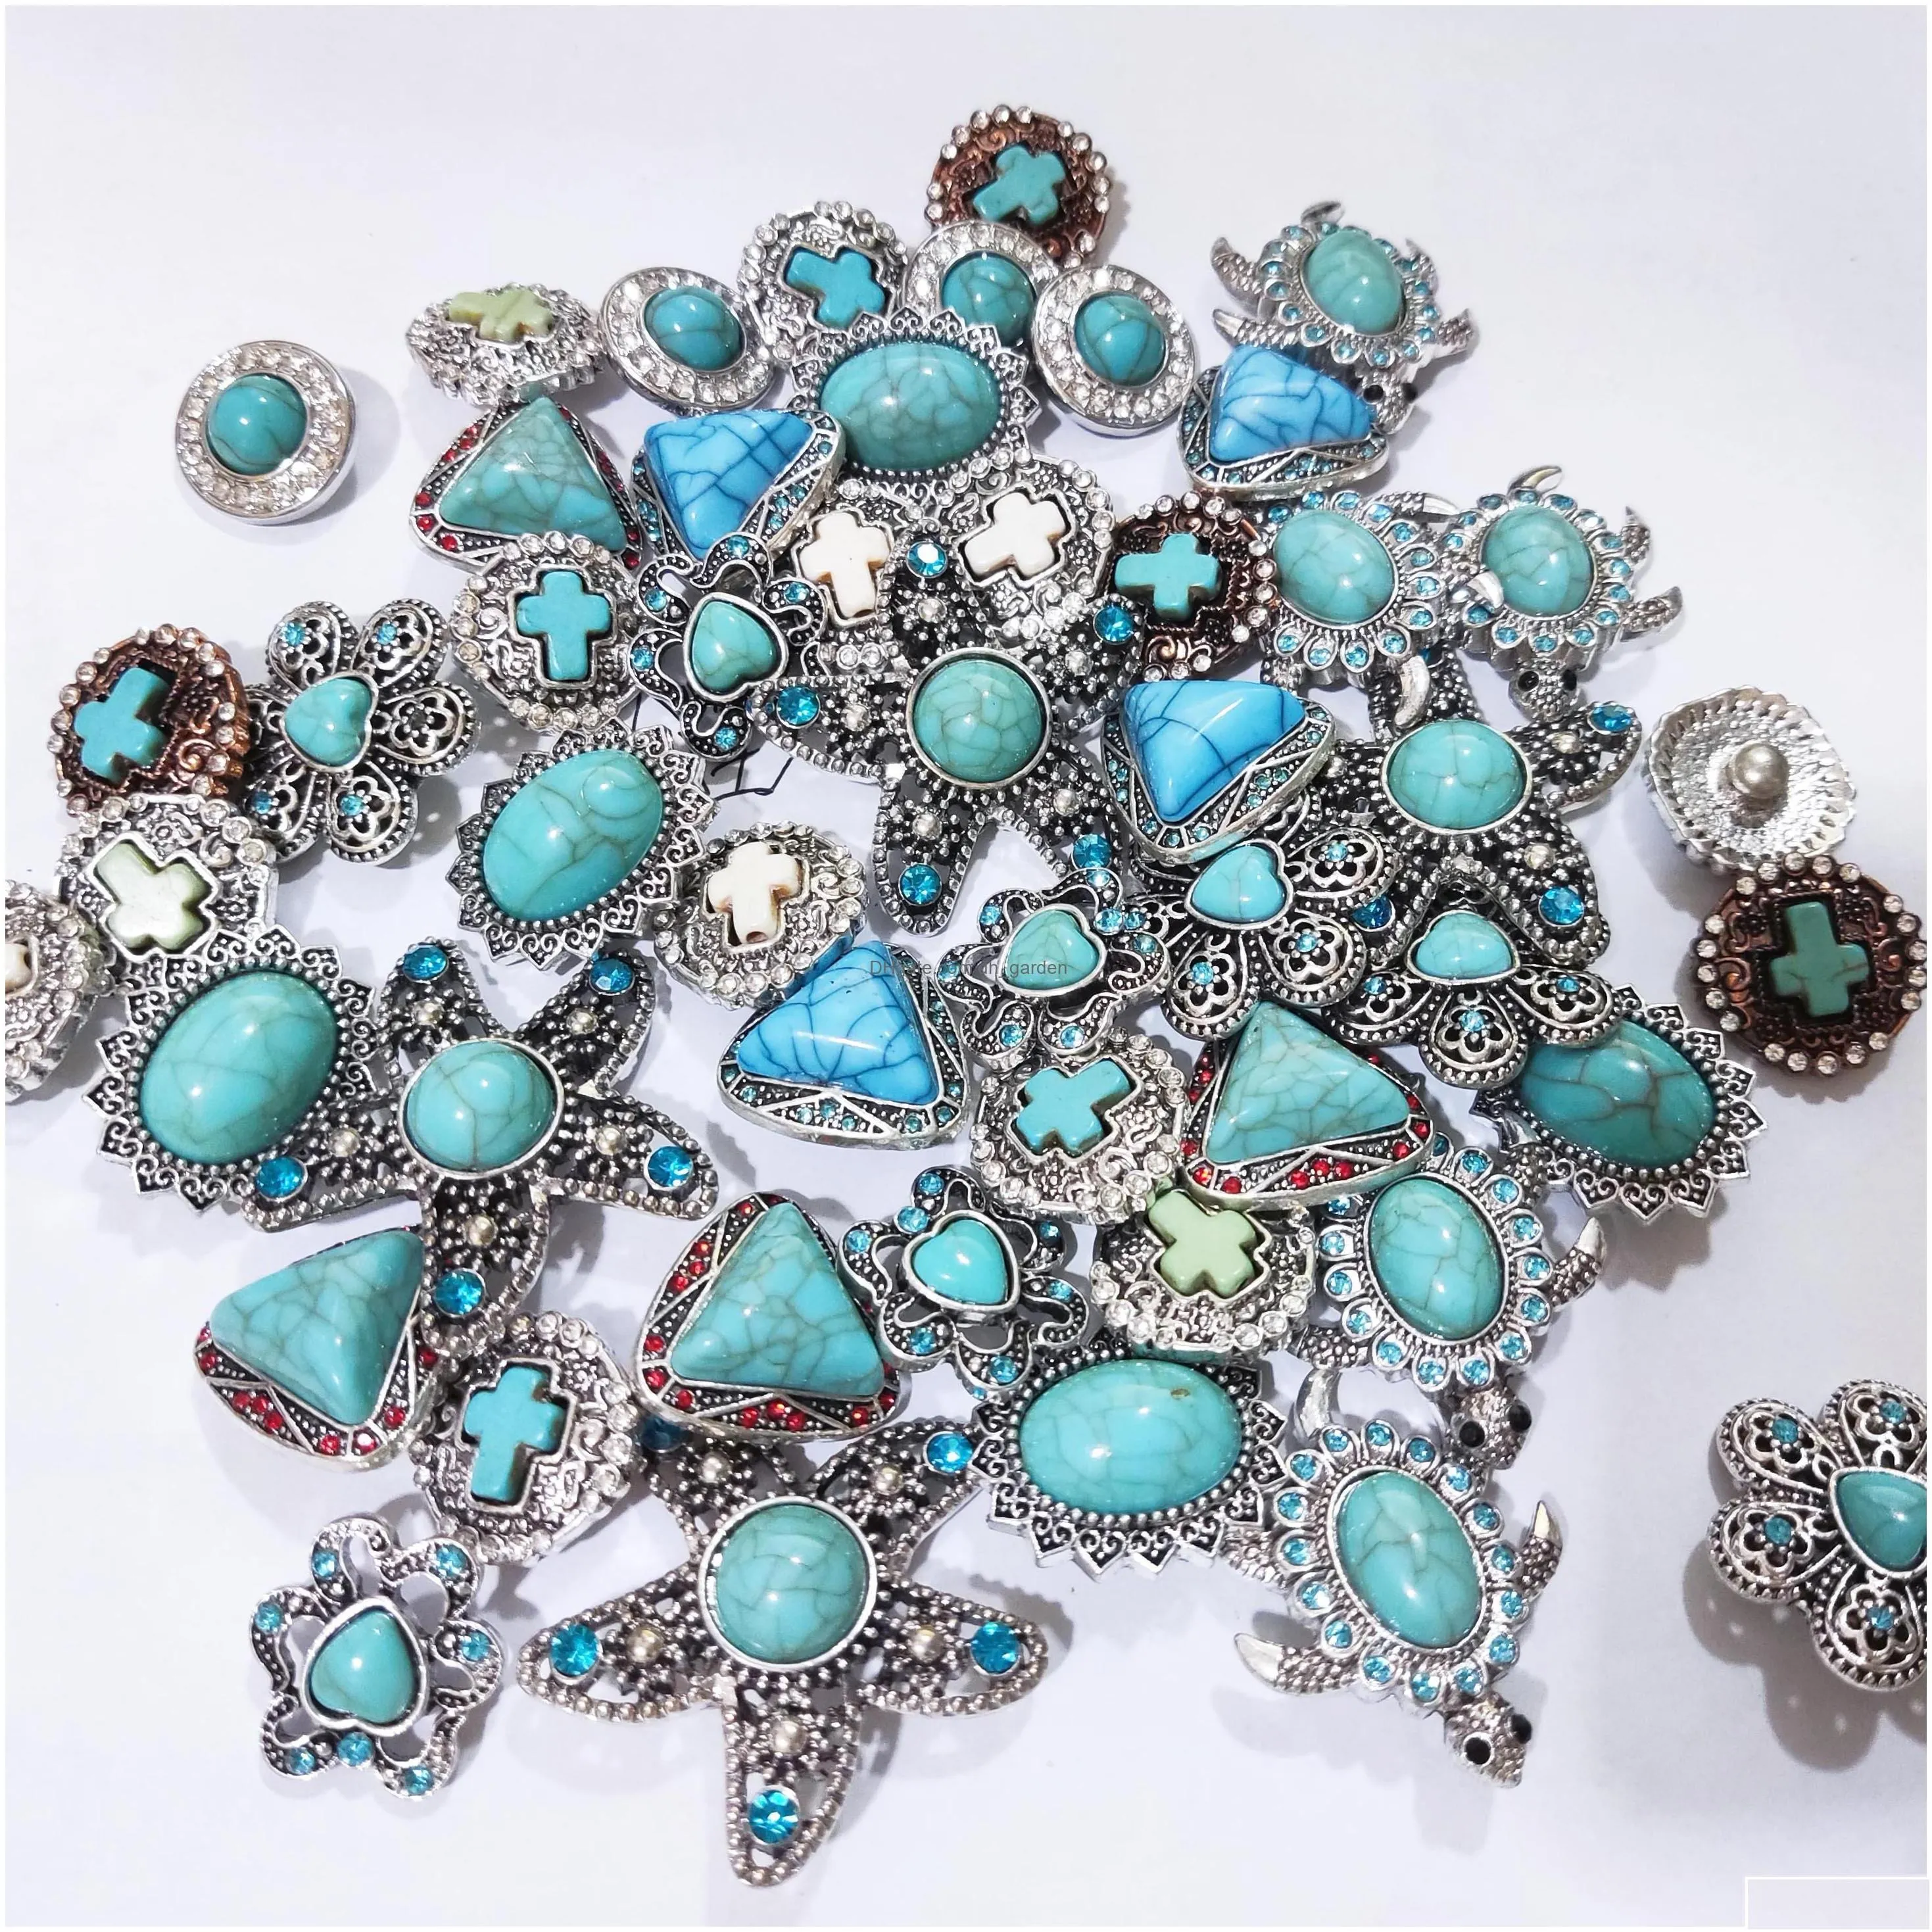 Other Sier Color Turquoise Paved Alloy Components 18Mm Snap Button Charms Beads Jewelry Making Diy Necklace Earrings Bracele Dhgarden